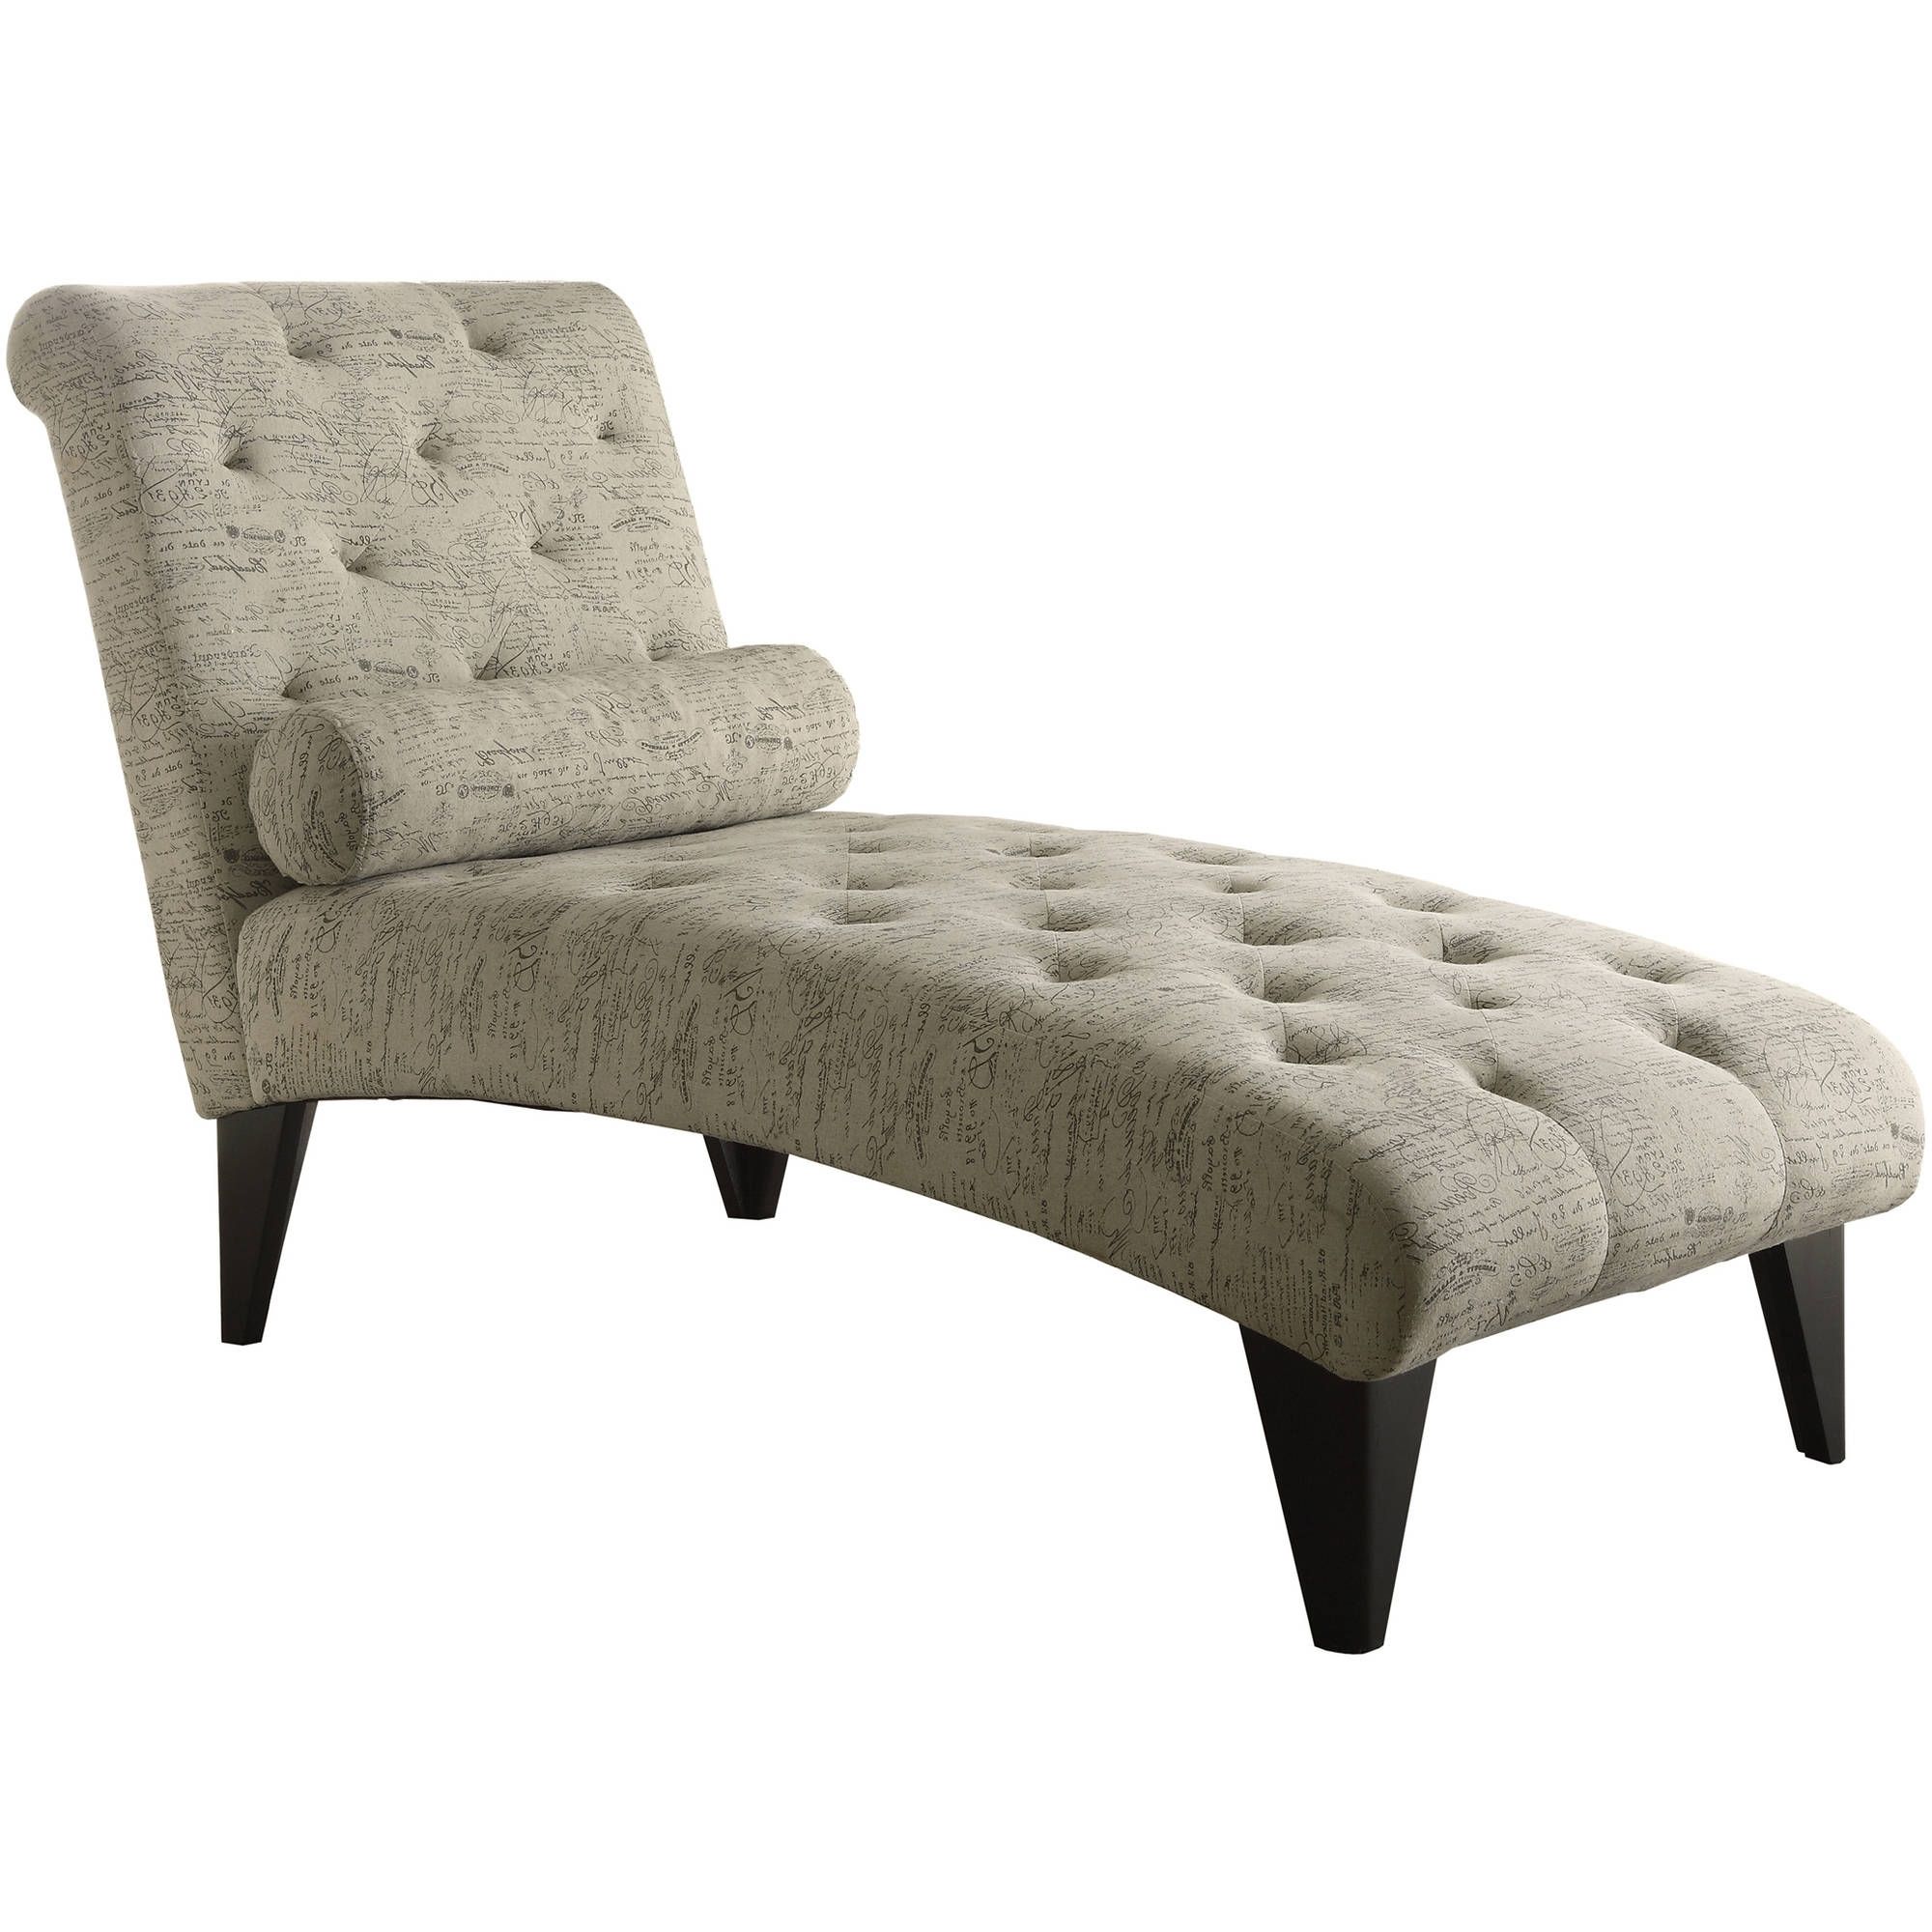 Chaise Lounges – Walmart With Regard To Recent Gray Chaise Lounge Chairs (View 4 of 15)